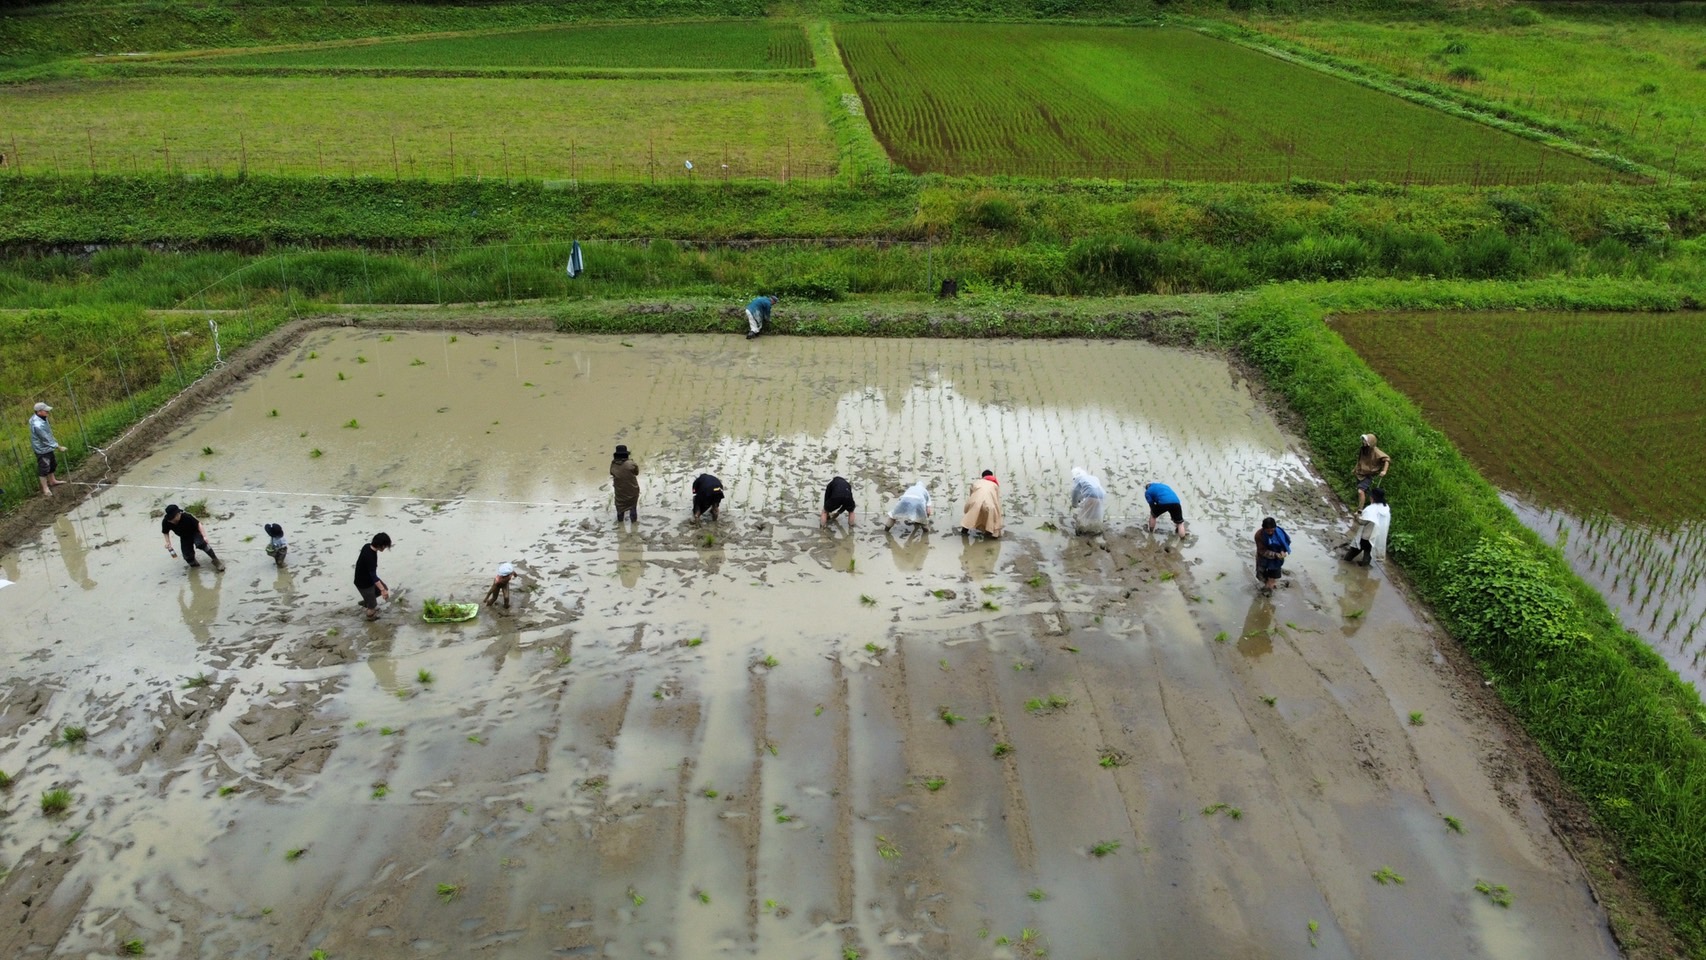 Hand-planting the rice